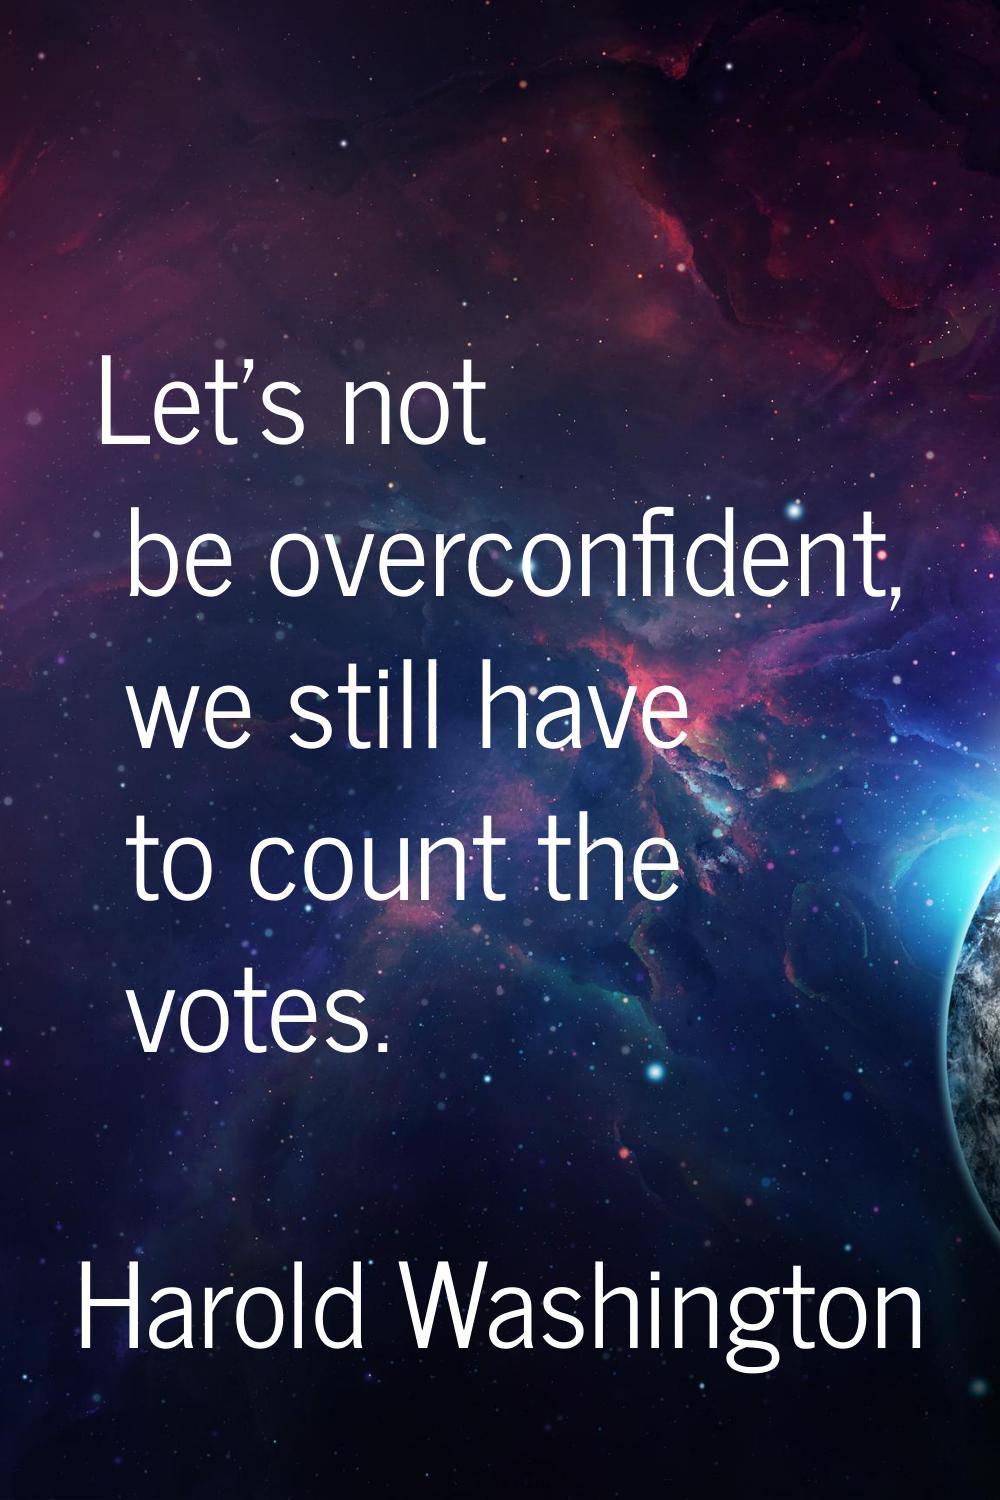 Let's not be overconfident, we still have to count the votes.